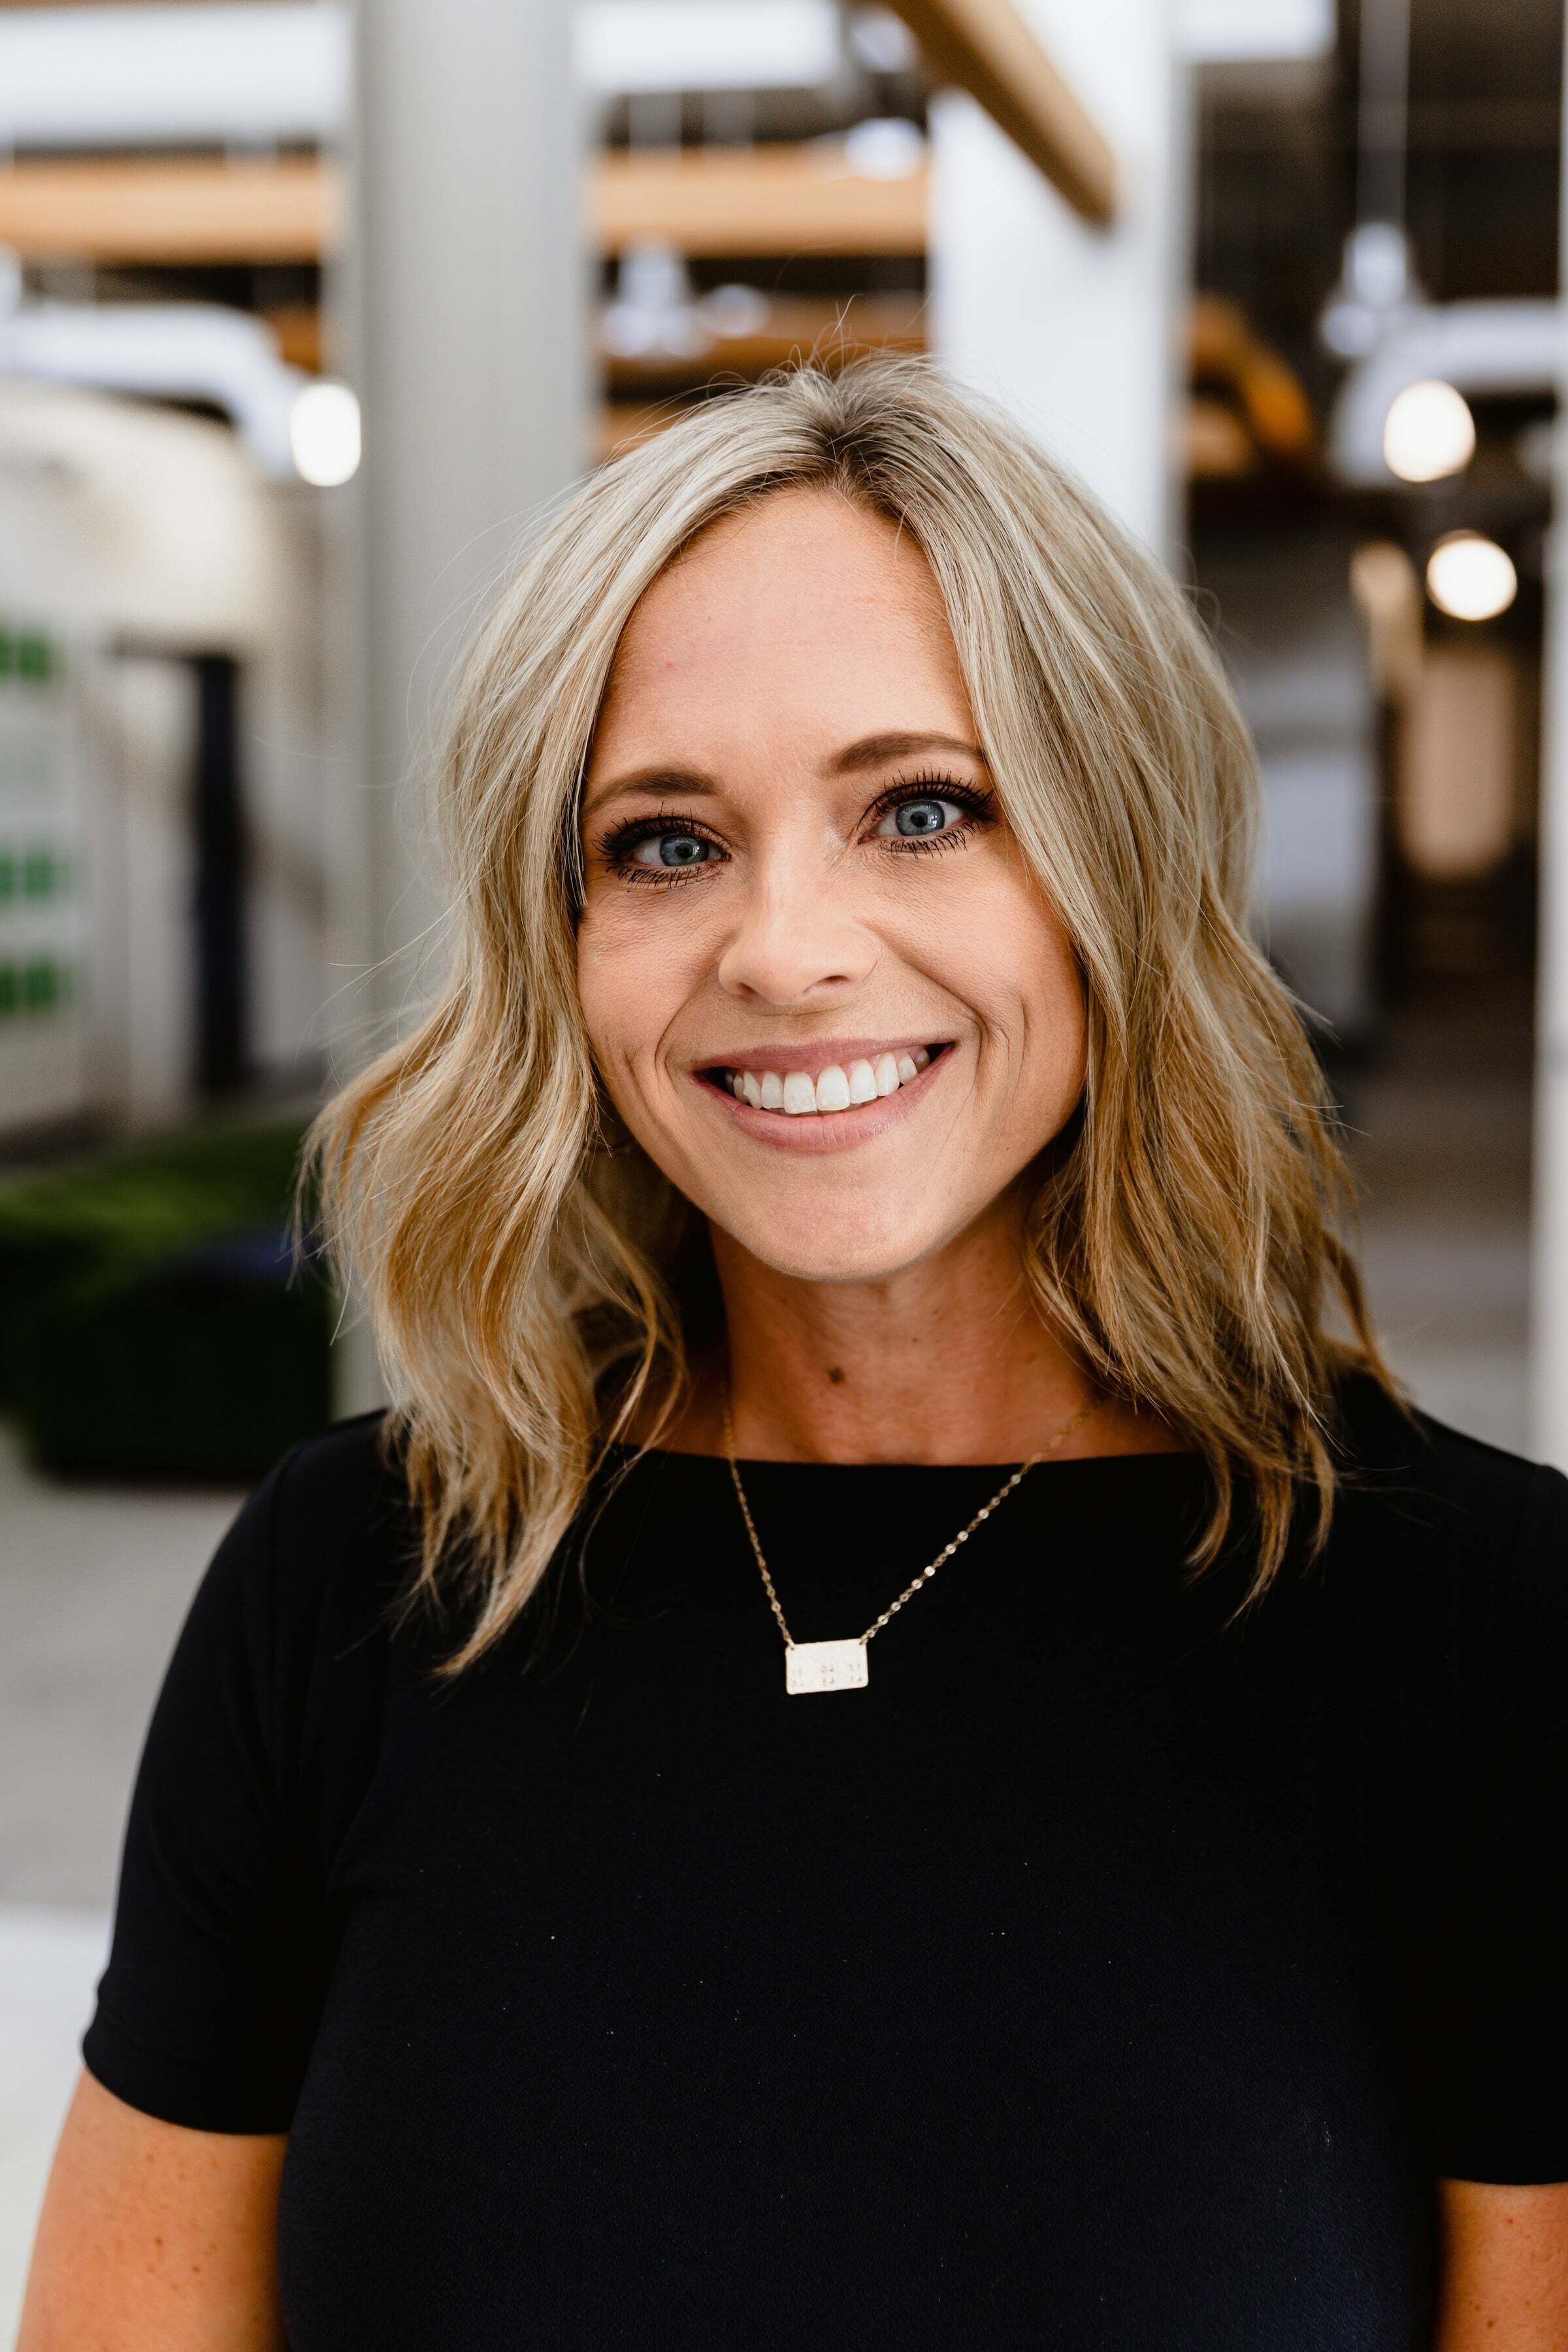 Courtney Meysenburg, Real Estate Salesperson in Omaha, The Good Life Group